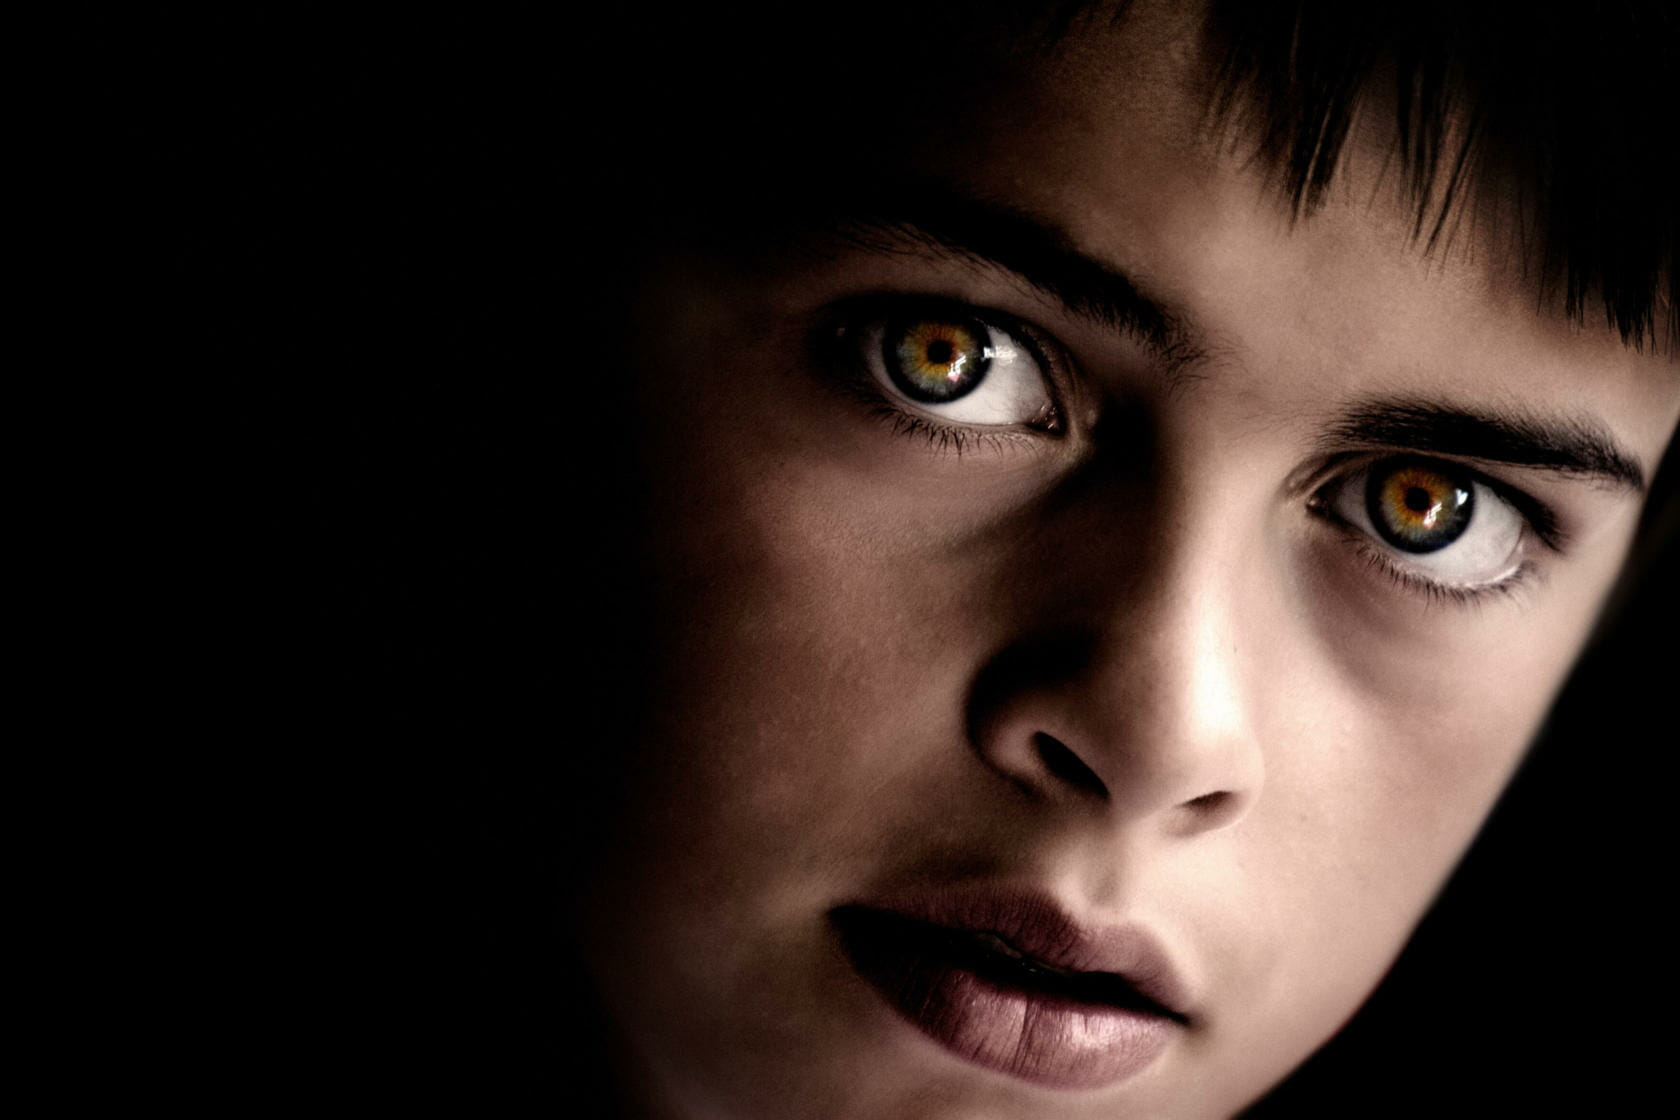 Portrait of Young Boy with Intense Eyes